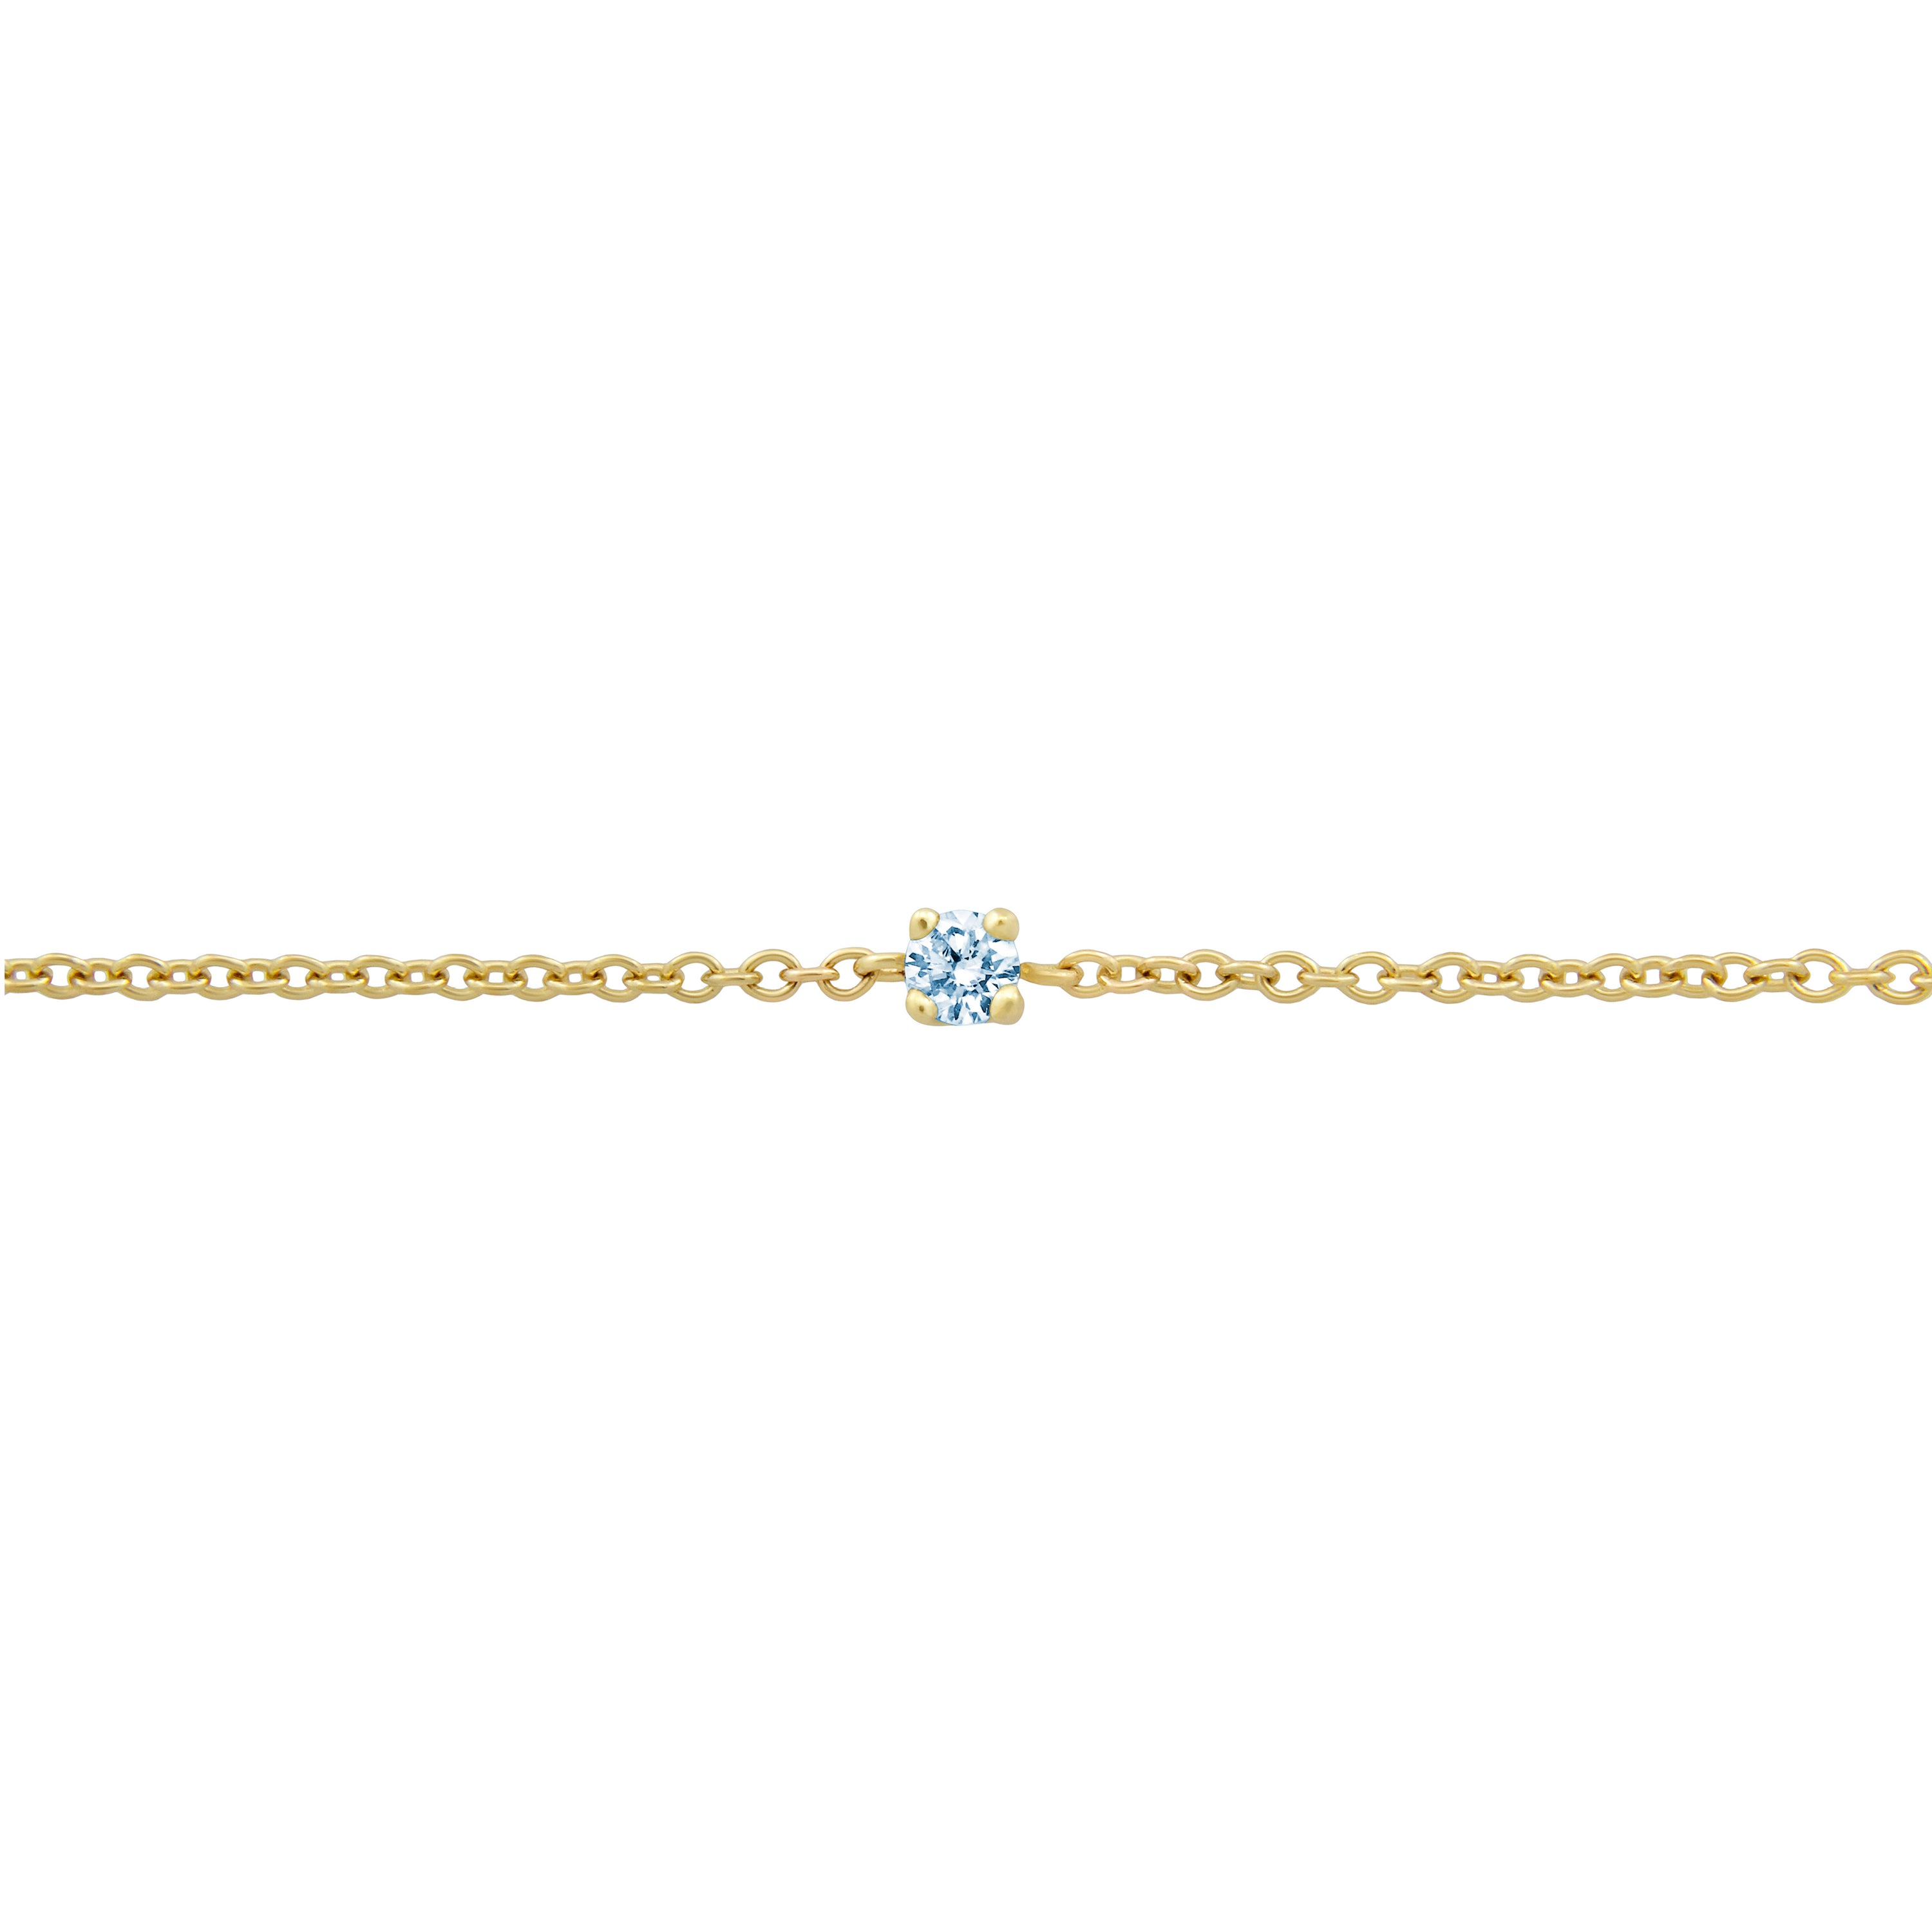 BONDED BLUE DIAMOND-SET CABLE CHAIN, 9k Yellow Gold